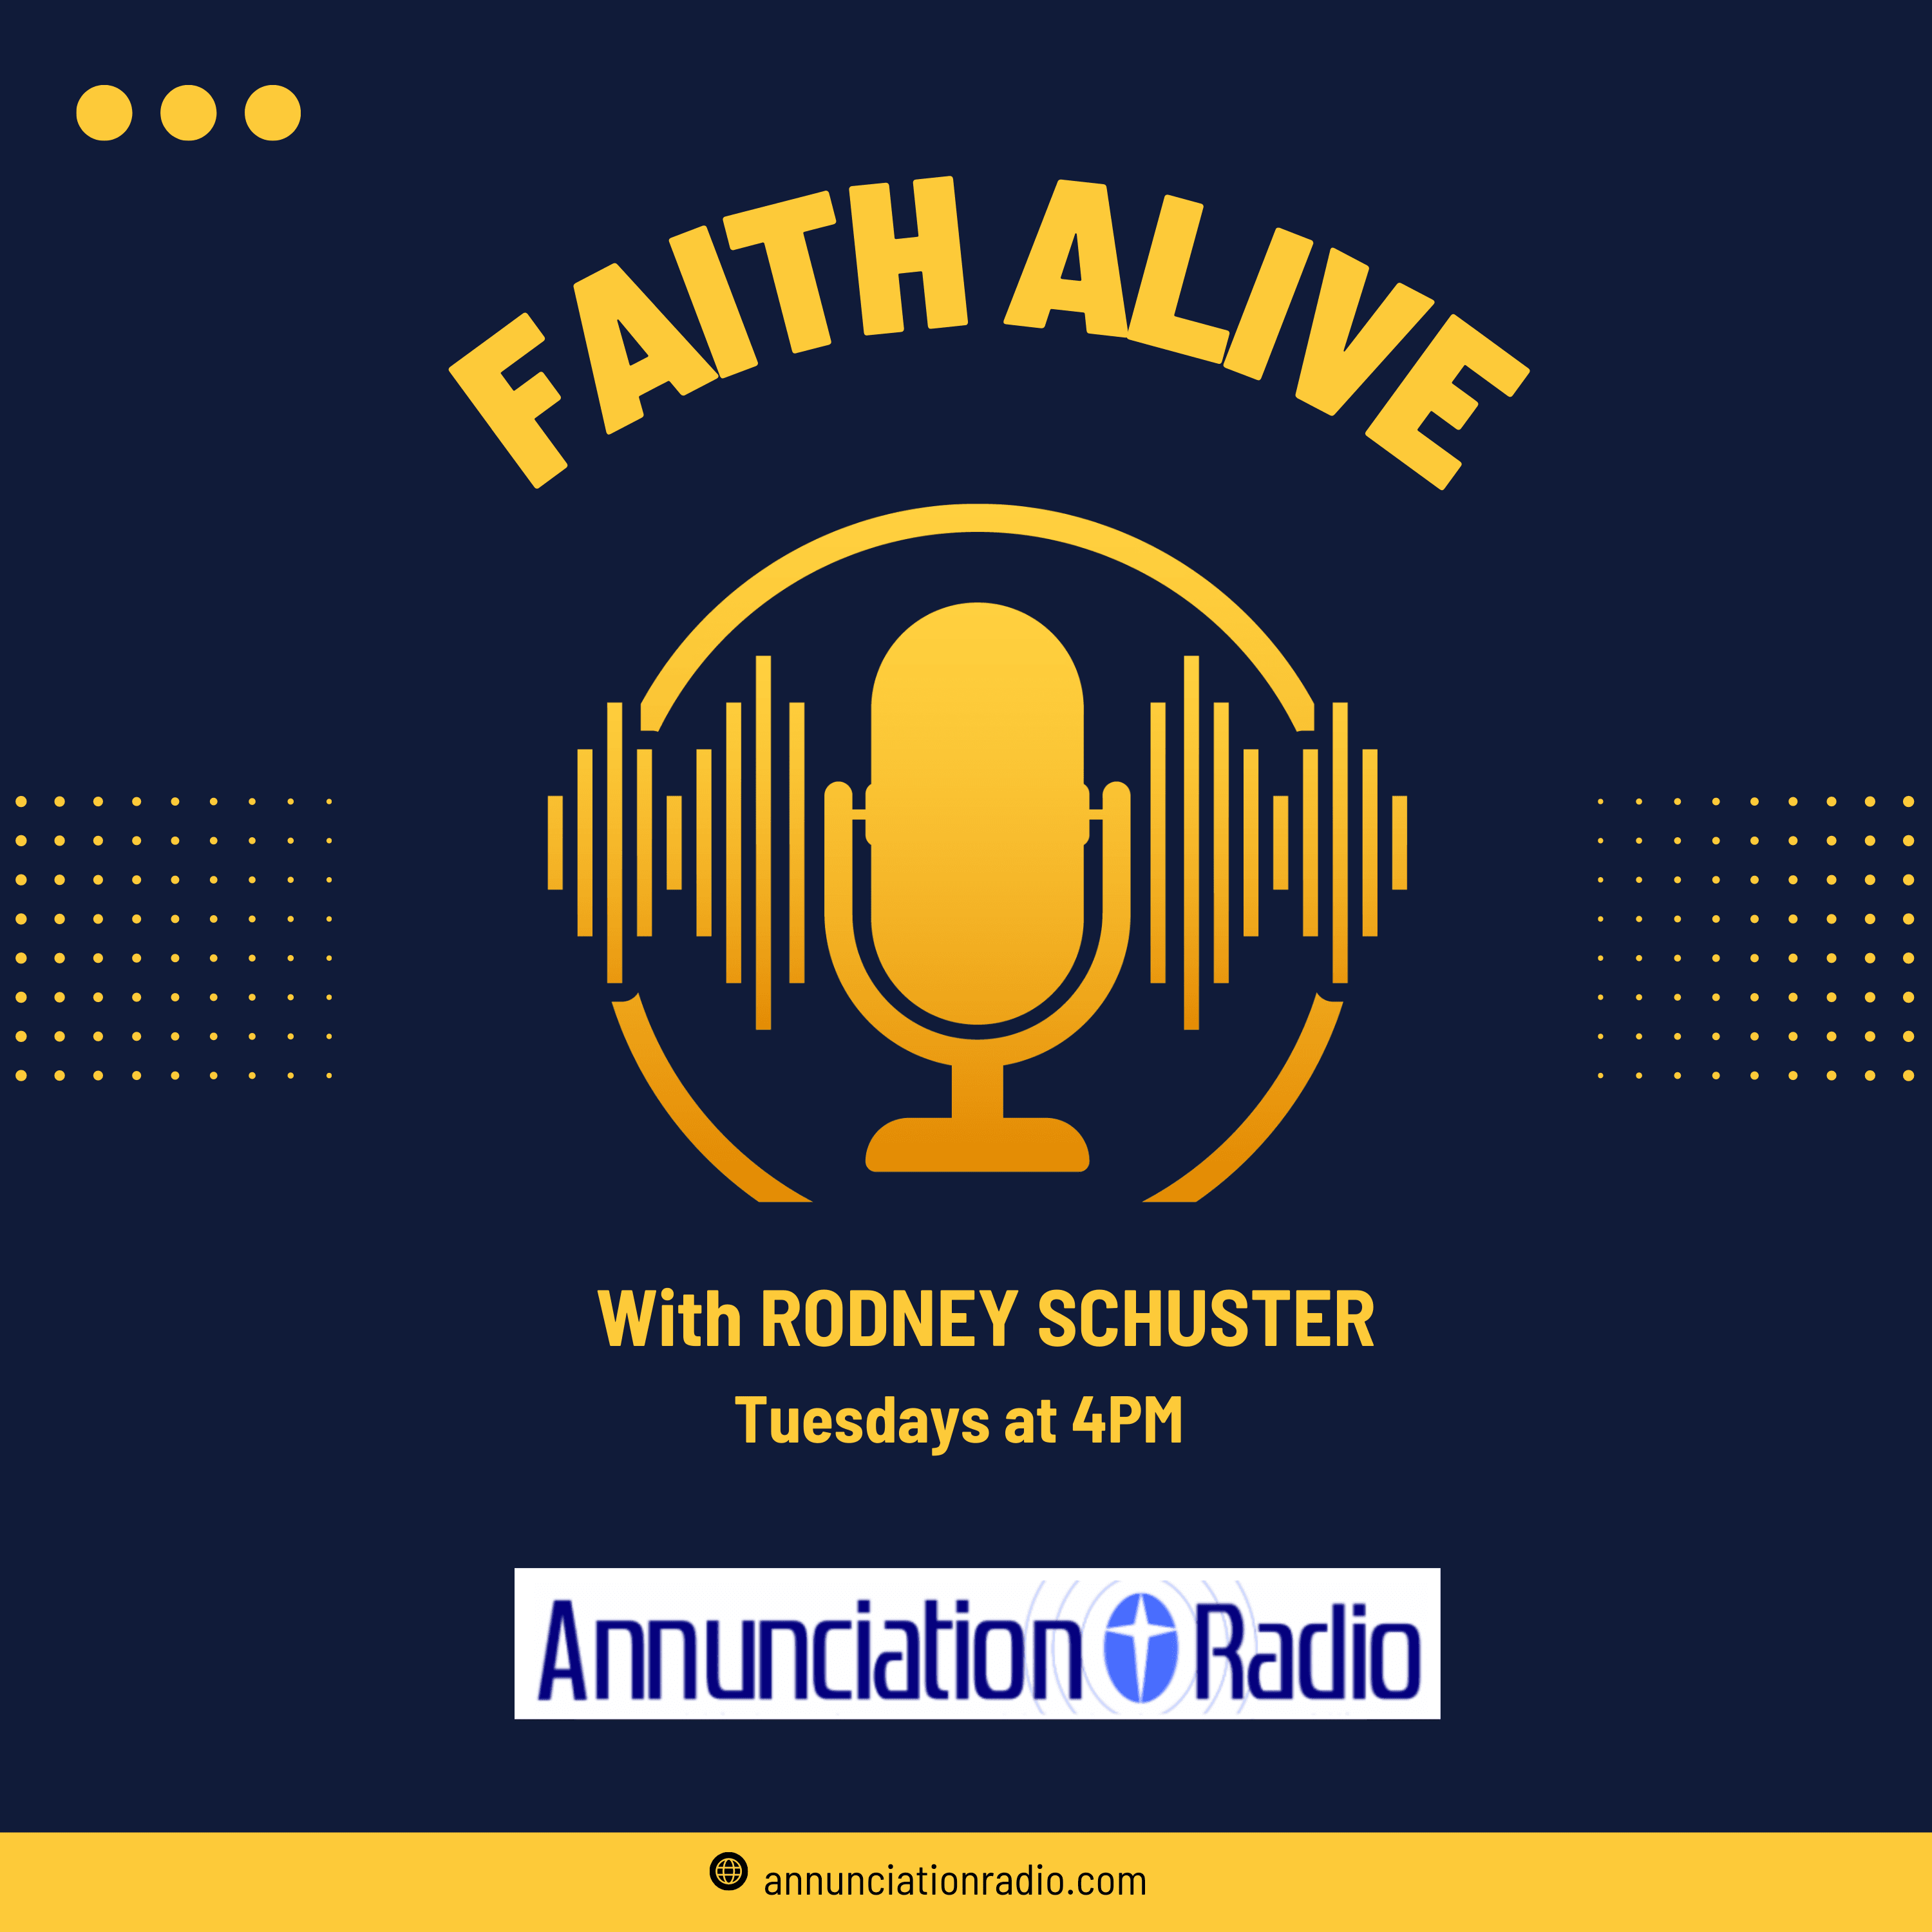 Catholic Charities hour-long "Faith Alive" program airs weekly on Annunciation Radio on Tuesdays at 4 p.m. and is re-broadcast at 3 p.m. on Saturdays. Listen to programs on demand.